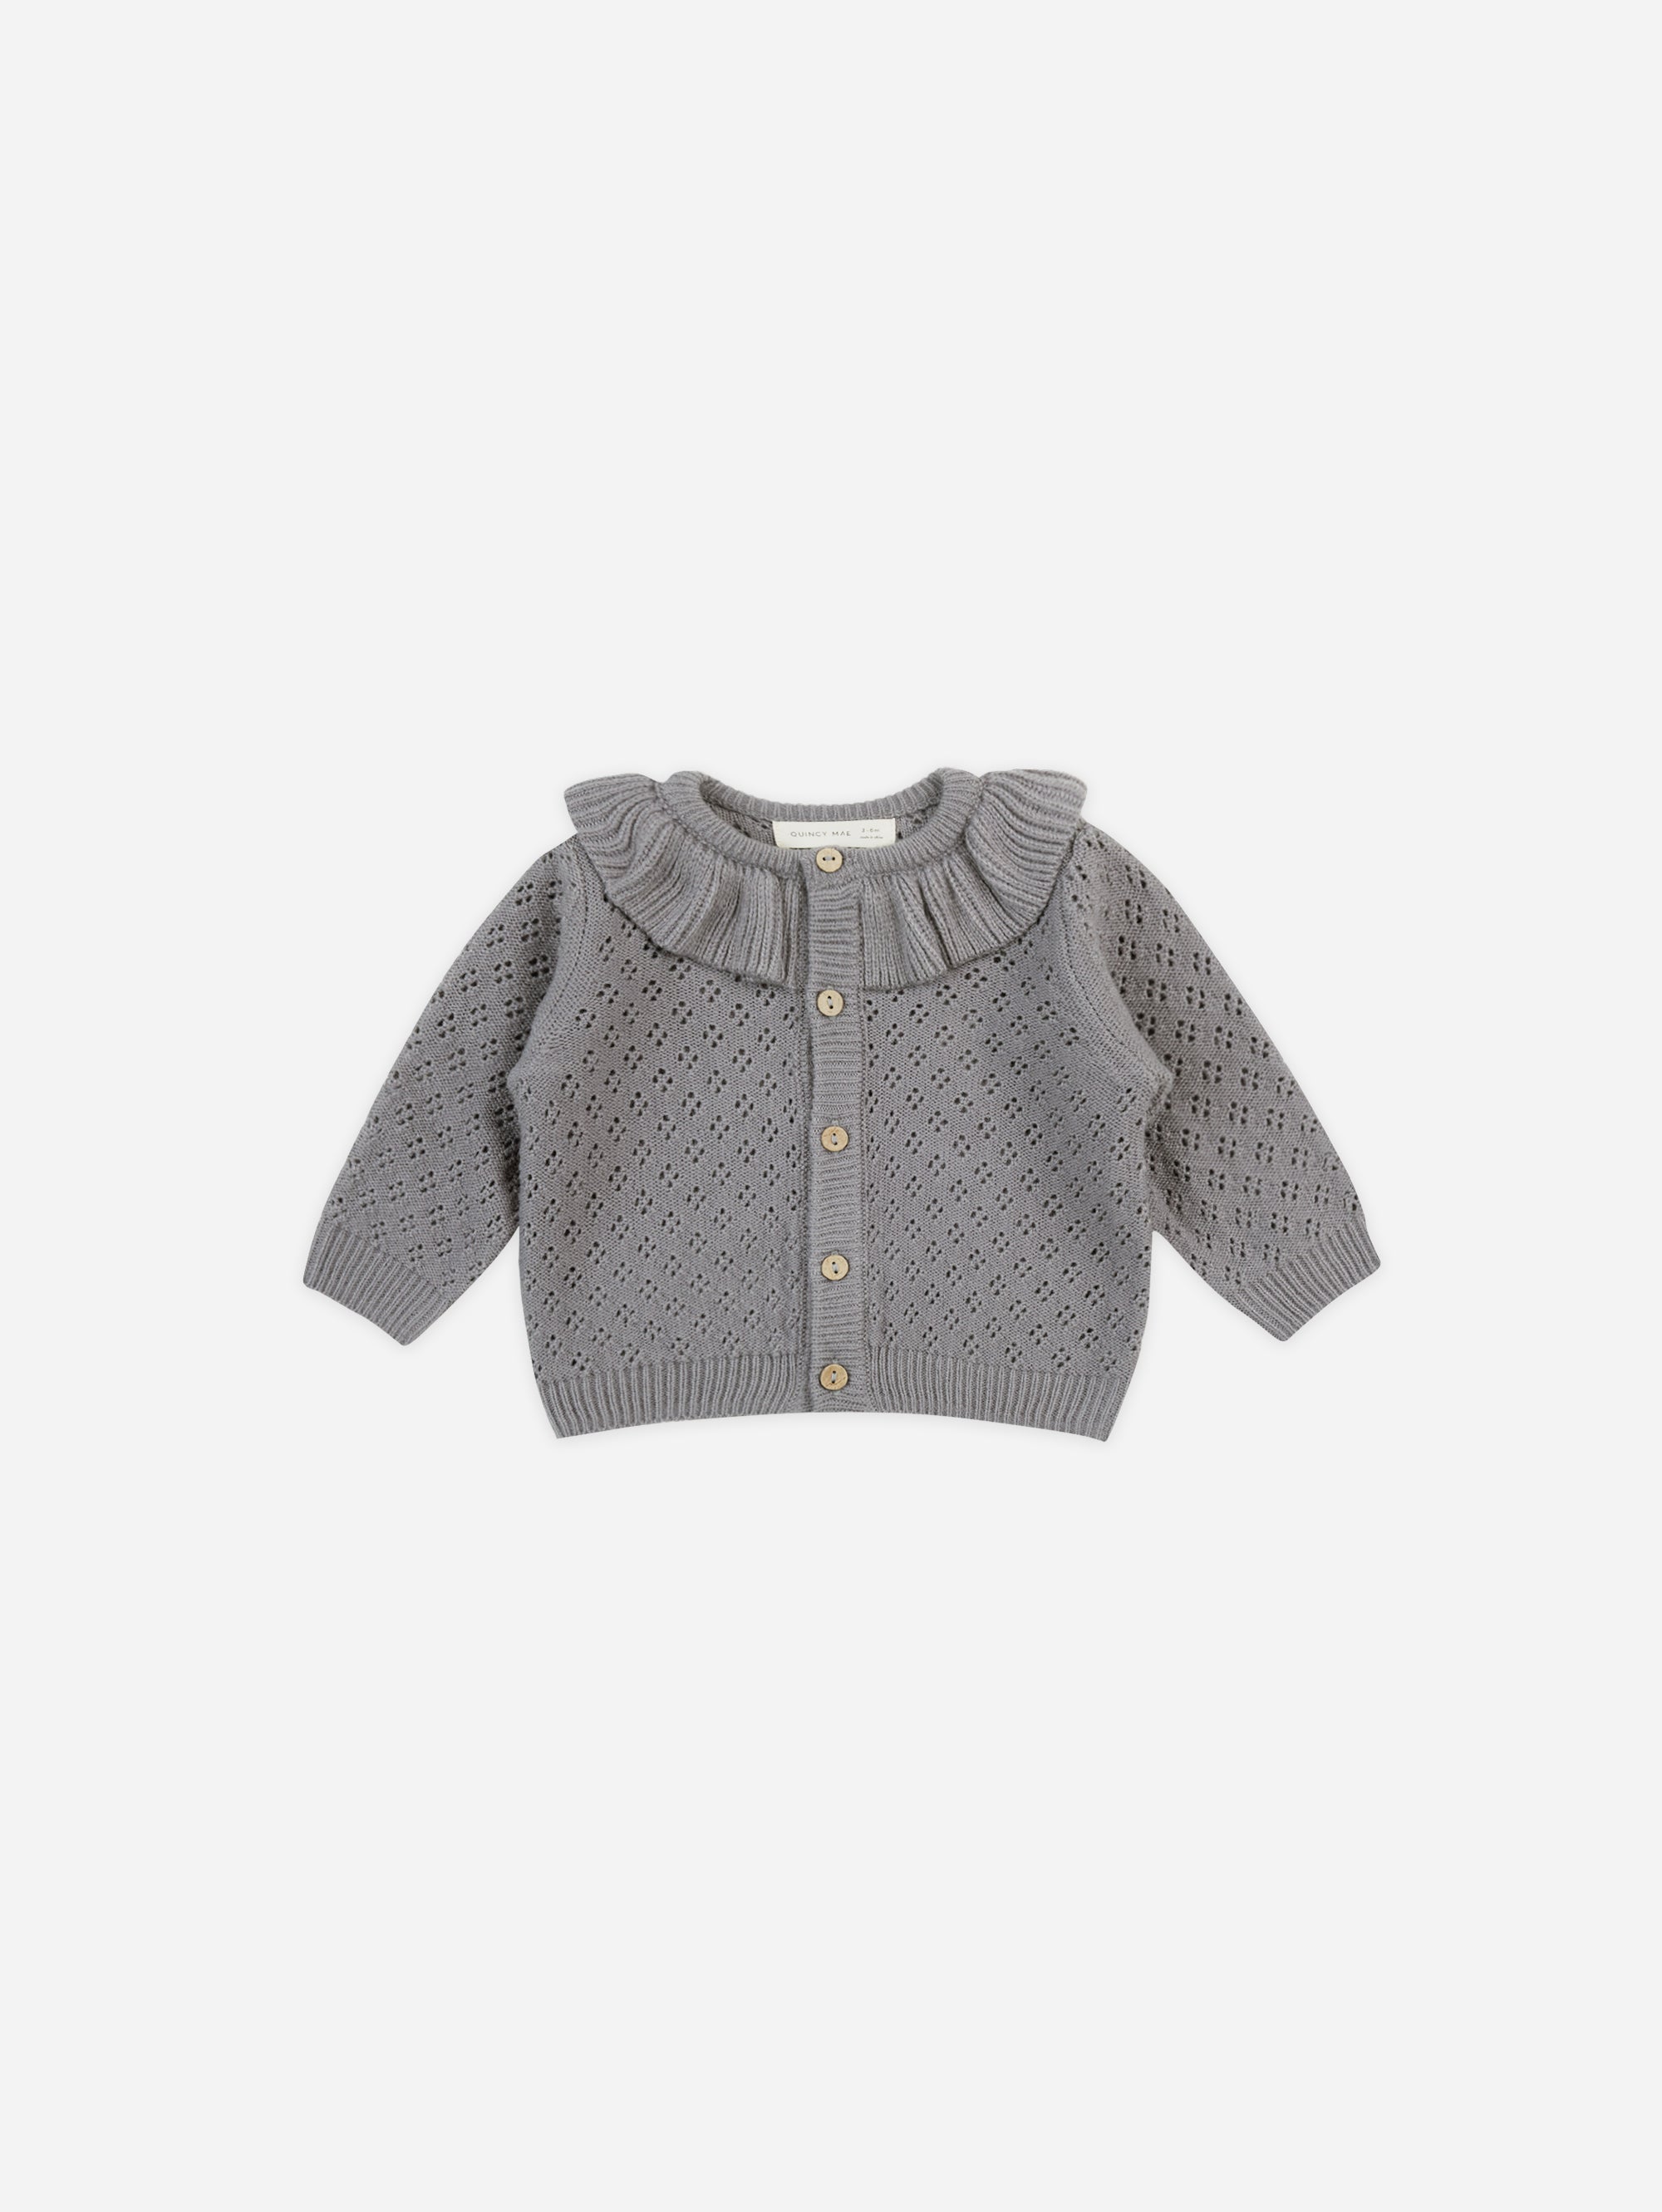 Ruffle Collar Cardigan || Lagoon - Rylee + Cru | Kids Clothes | Trendy Baby Clothes | Modern Infant Outfits |